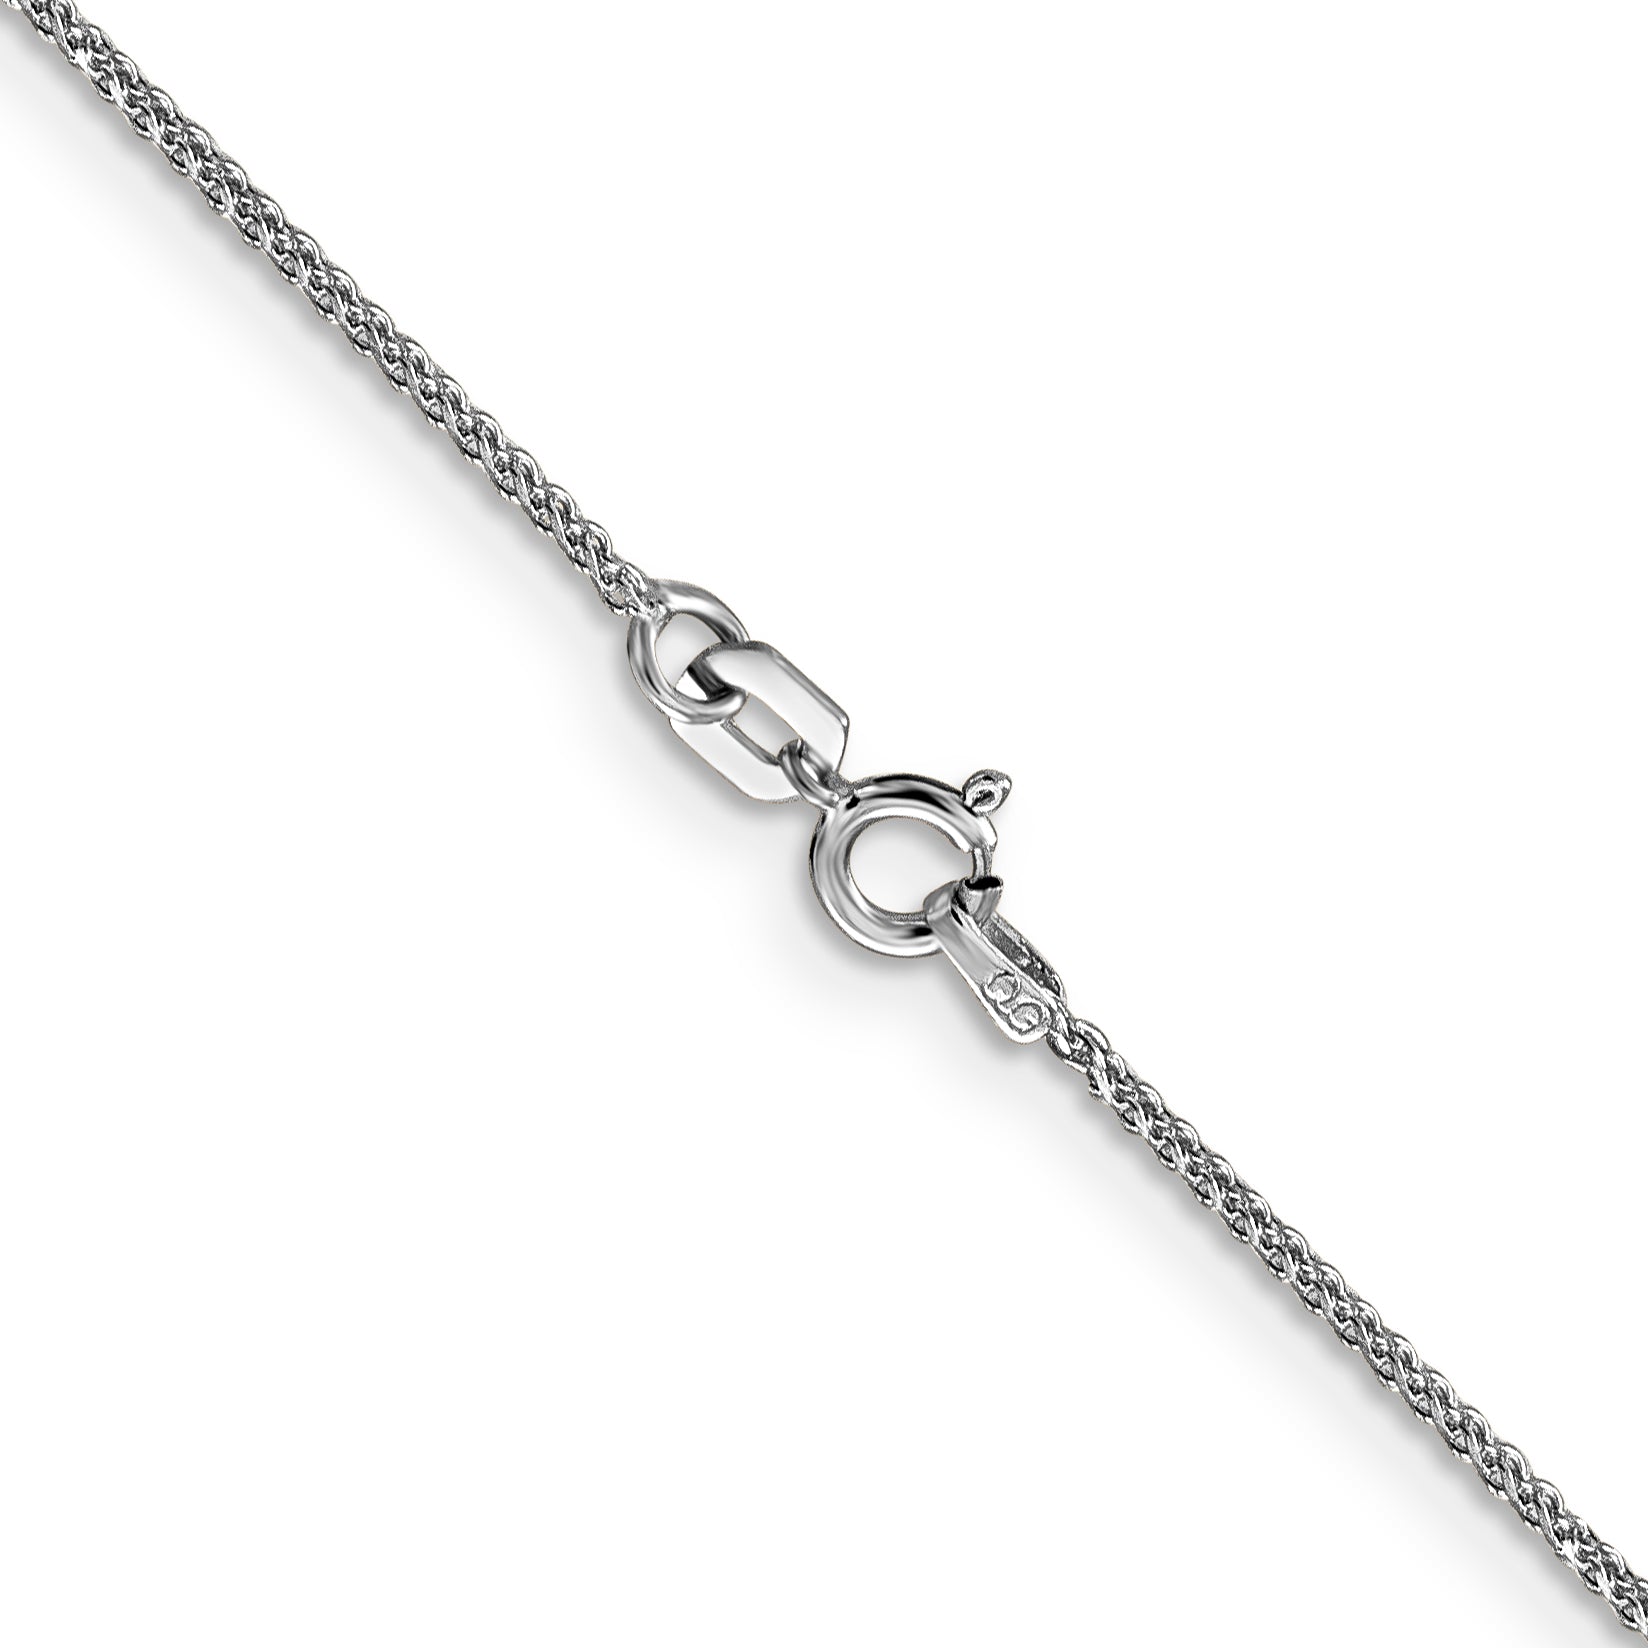 14k WG 1mm D/C Spiga with Spring Ring Clasp Chain